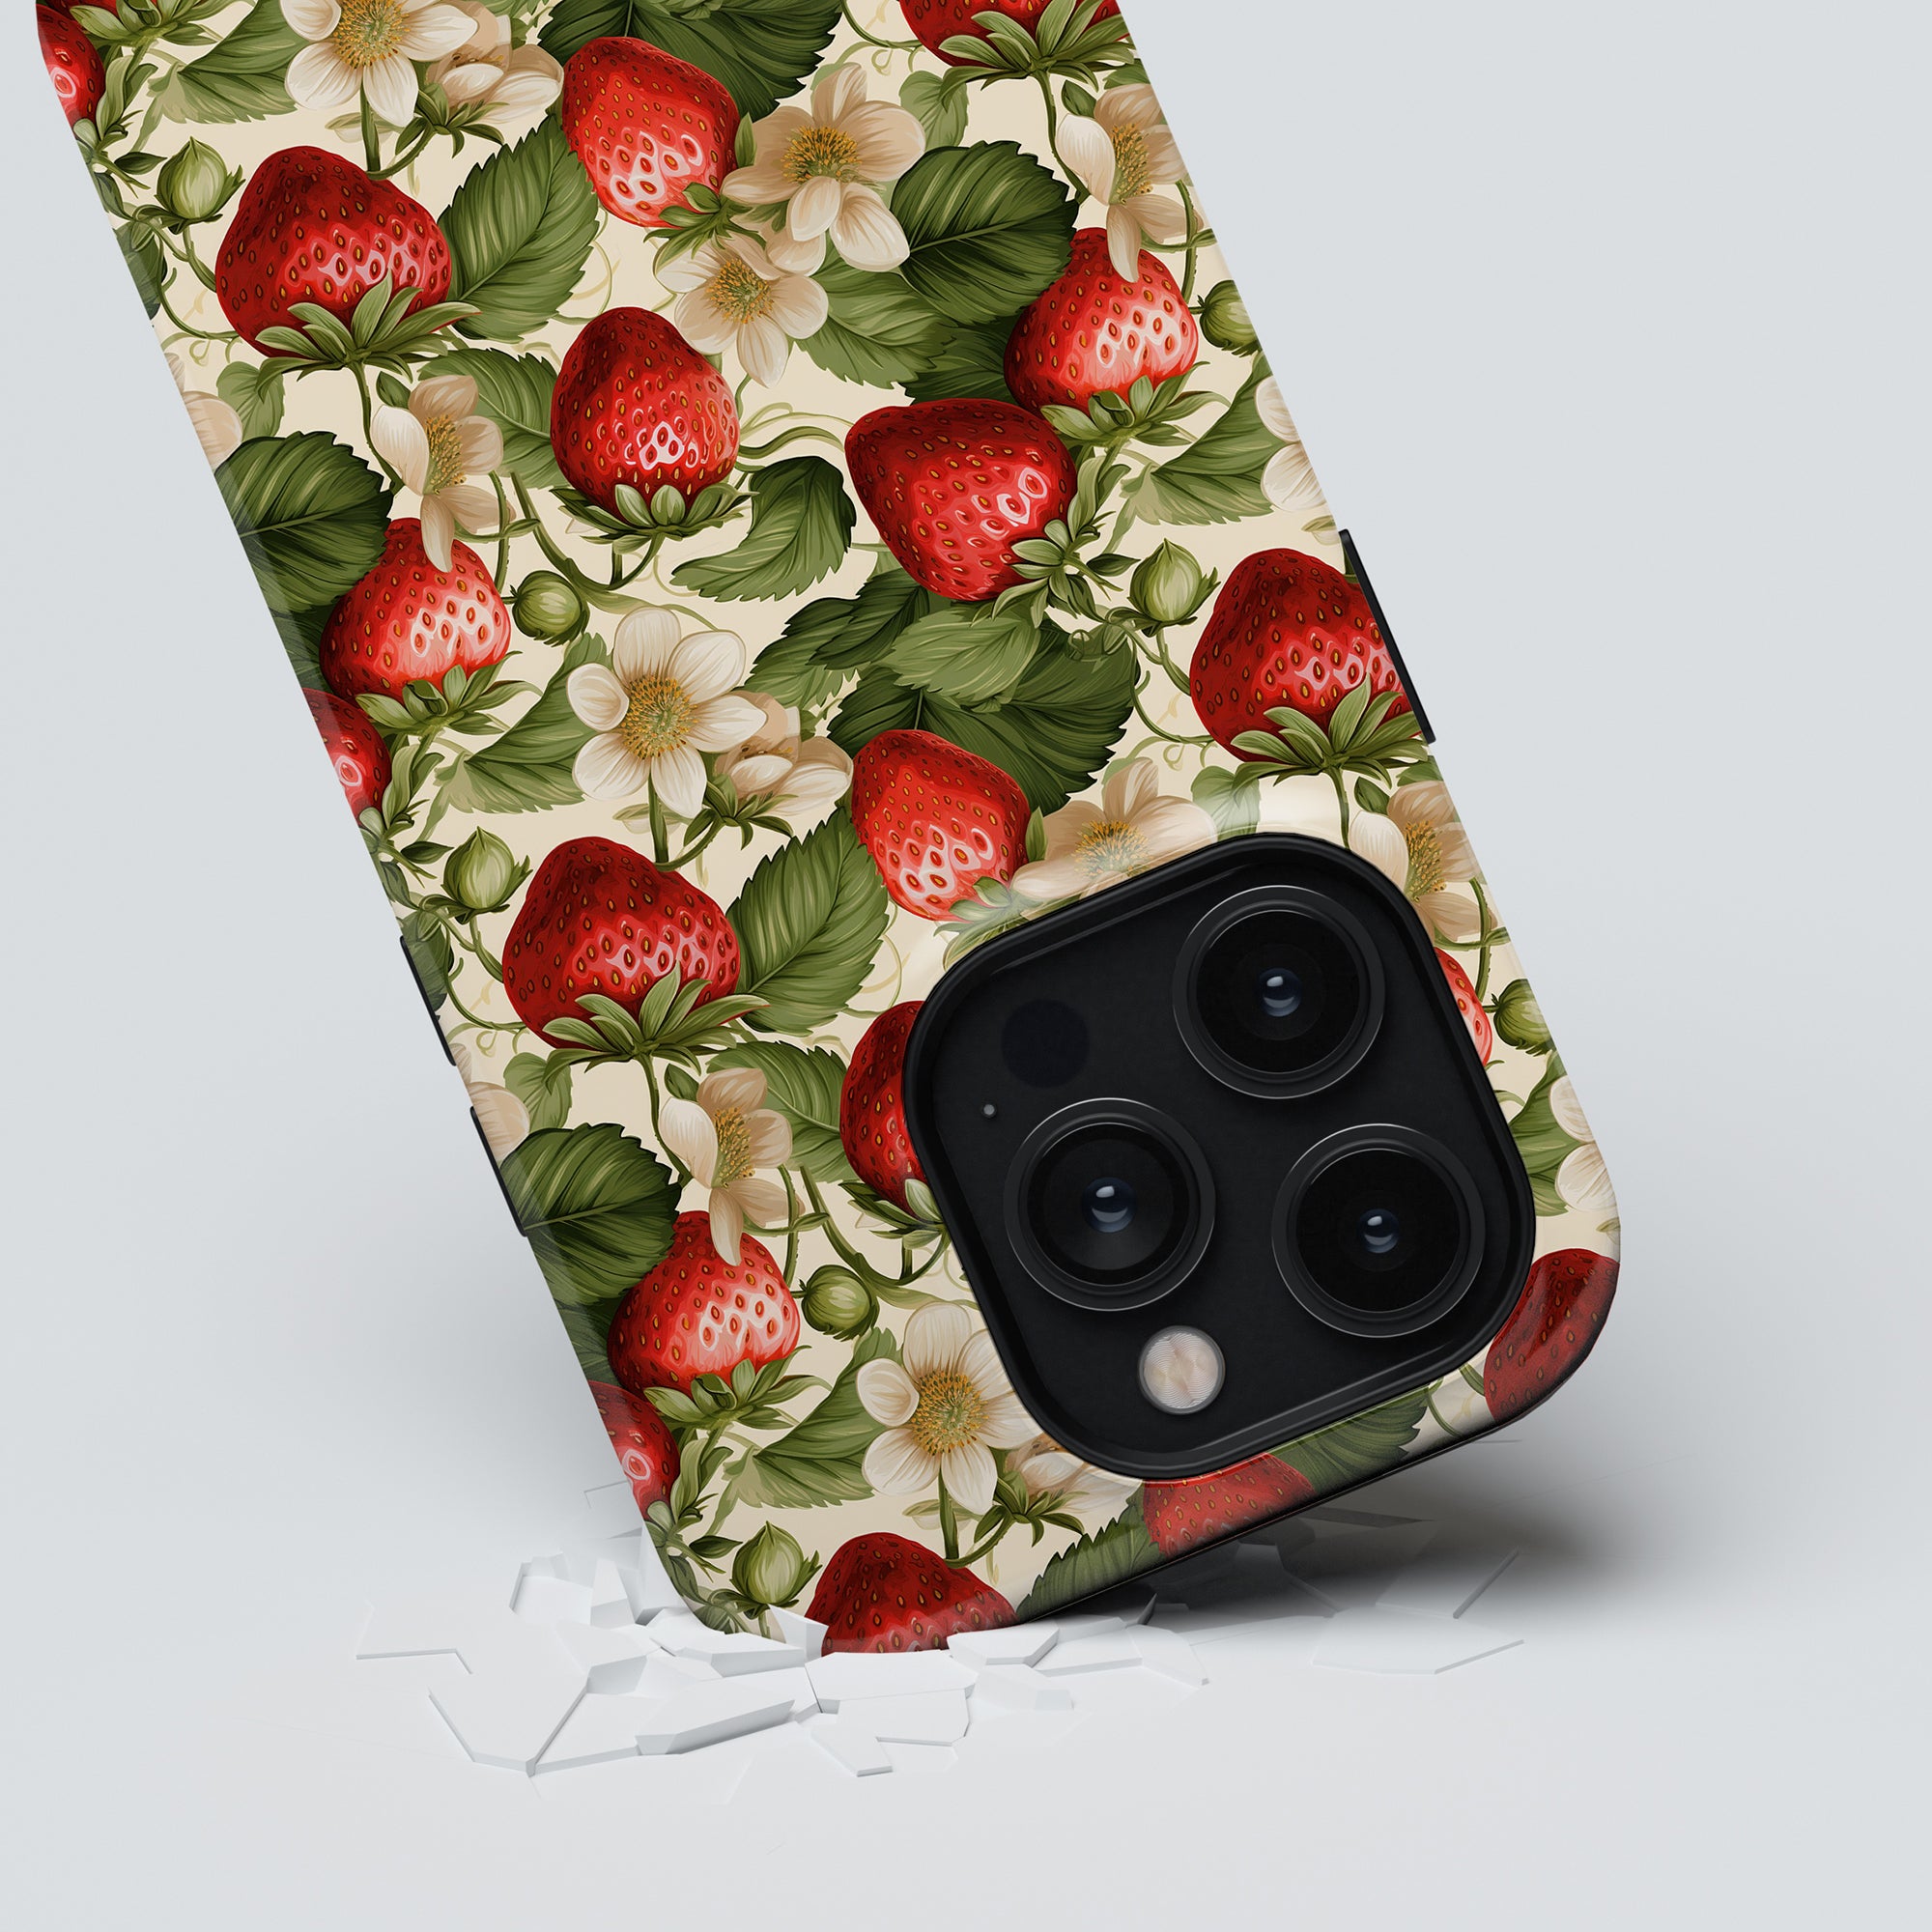 Strawberries - Tough Case with a triple camera breaking through a surface with strawberry and flower print design from the exotic collection.